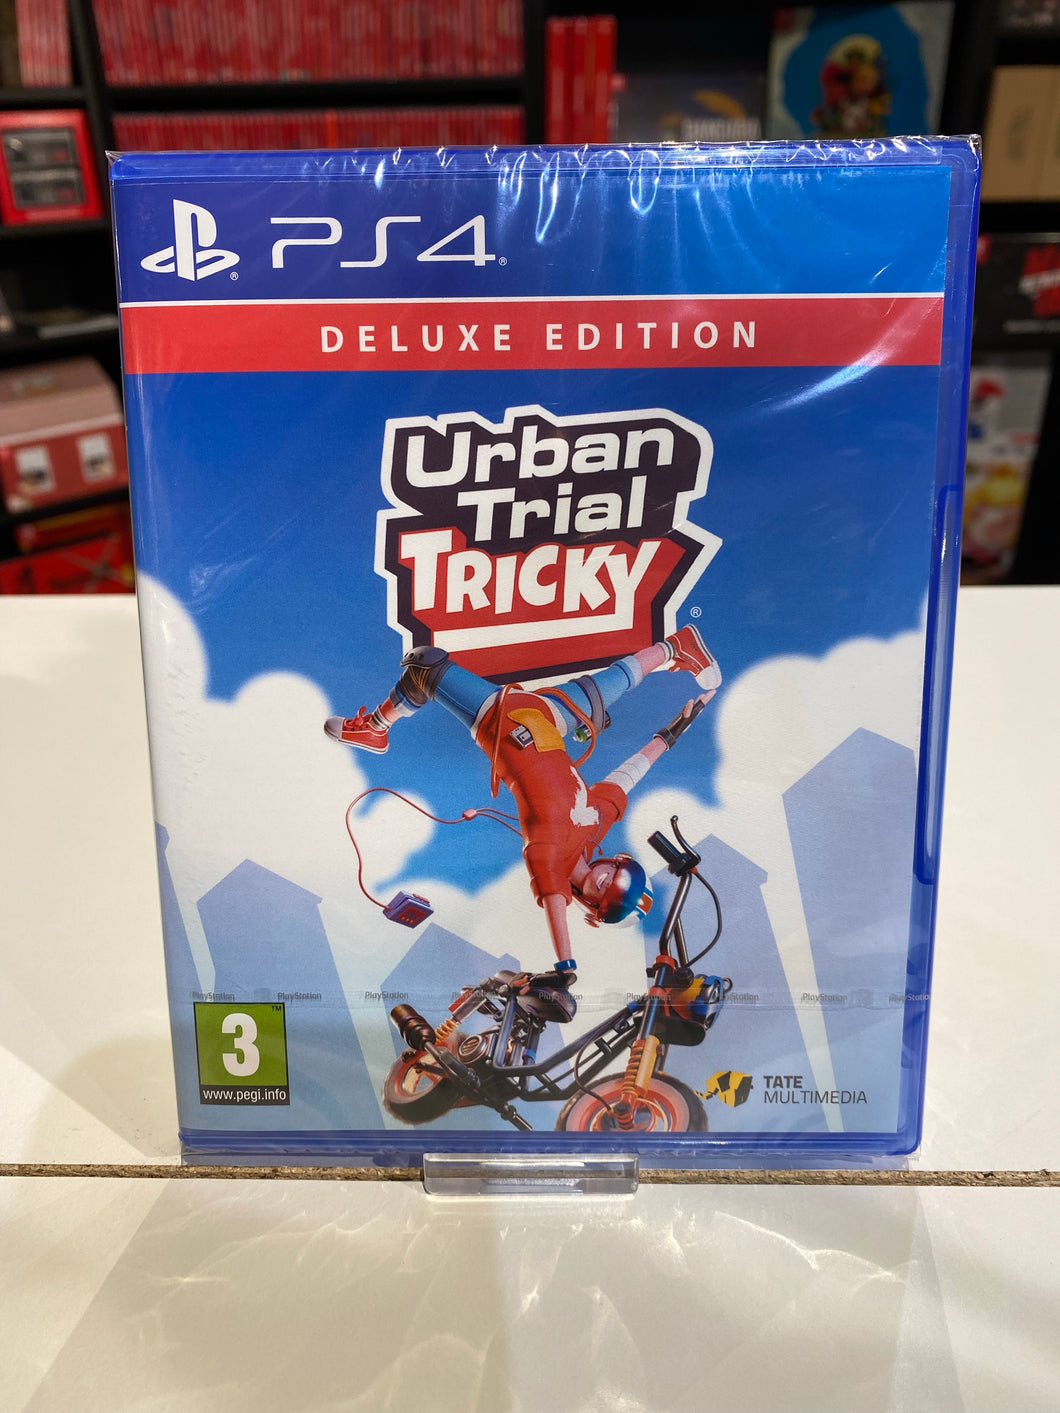 Urban trial tricky deluxe edition / x999 kopies / Red art games / ps4